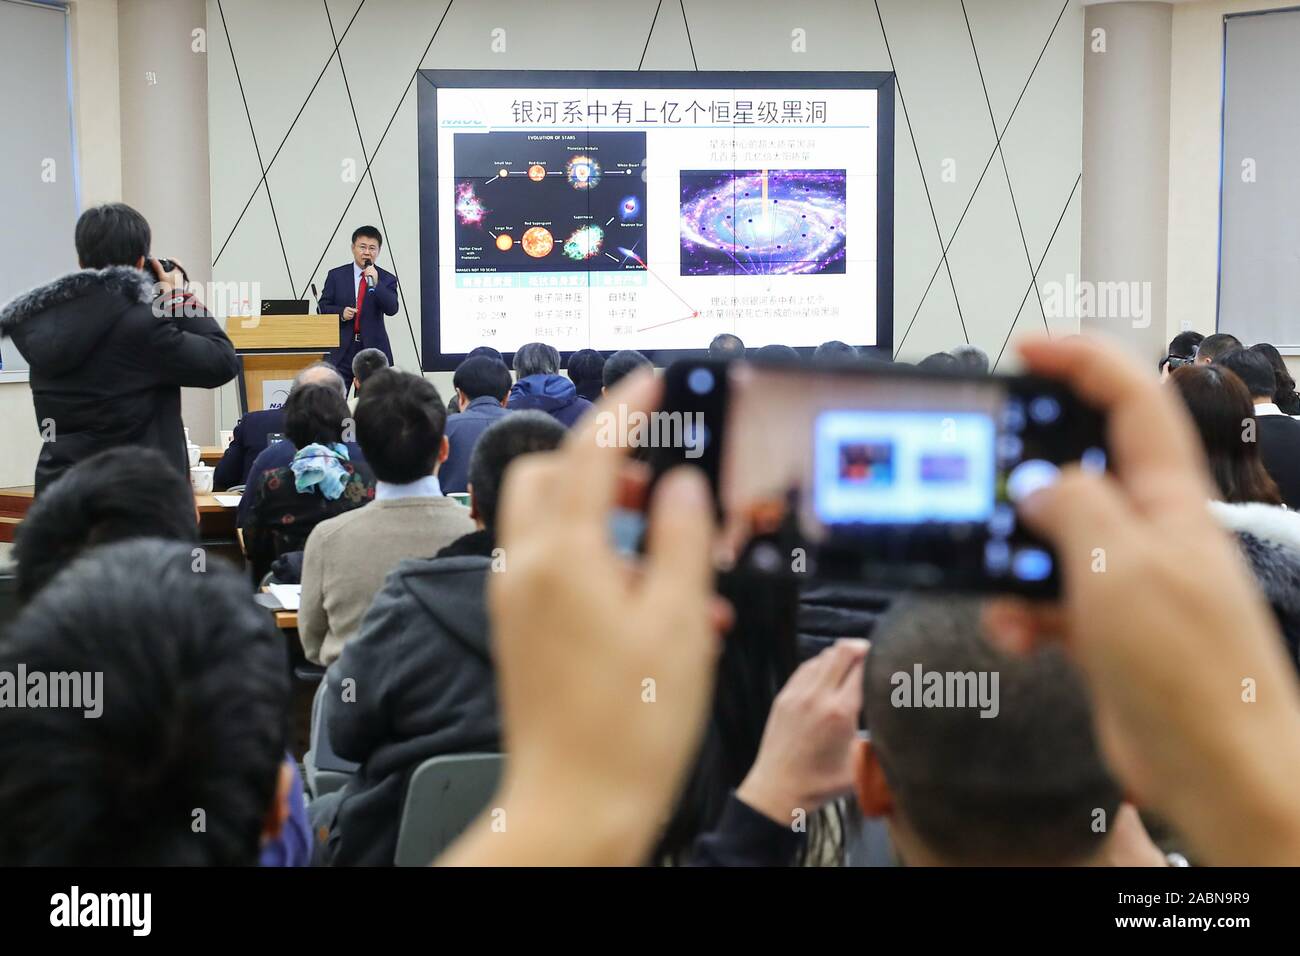 Beijing, China. 28th Nov 2019. (191128) -- BEIJING, Nov. 28, 2019 (Xinhua) -- Liu Jifeng, deputy director-general of the National Astronomical Observatory of the Chinese Academy of Sciences (NAOC) and the first author of the study, speaks during a press conference of the black hole LB-1 discovered with the Large Sky Area Multi-Object Fibre Spectroscopy Telescope (LAMOST), in Beijing, capital of China, Nov. 27, 2019. Credit: Xinhua/Alamy Live News Stock Photo